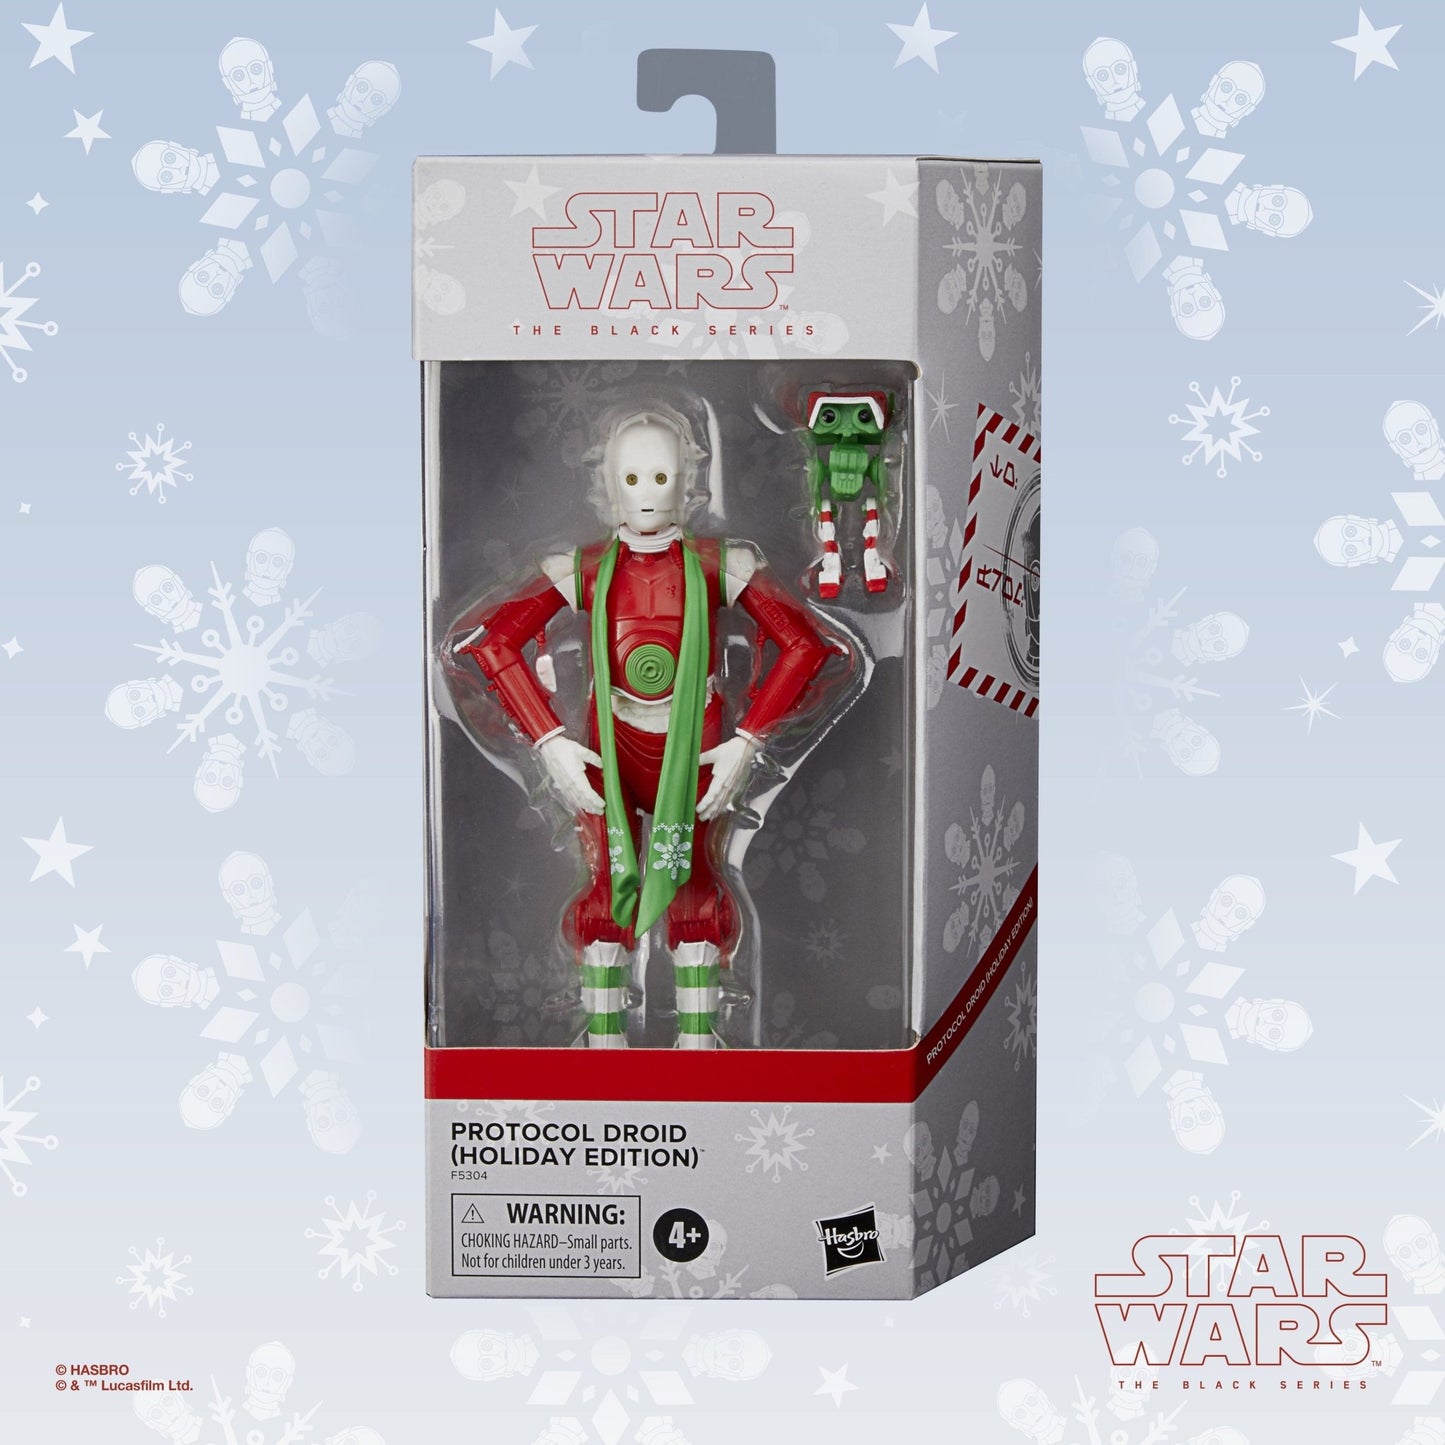 Star Wars The Black Series Protocol Droid (Holiday Edition) and BD Droid Toys, 6-Inch-Scale Holiday-Themed